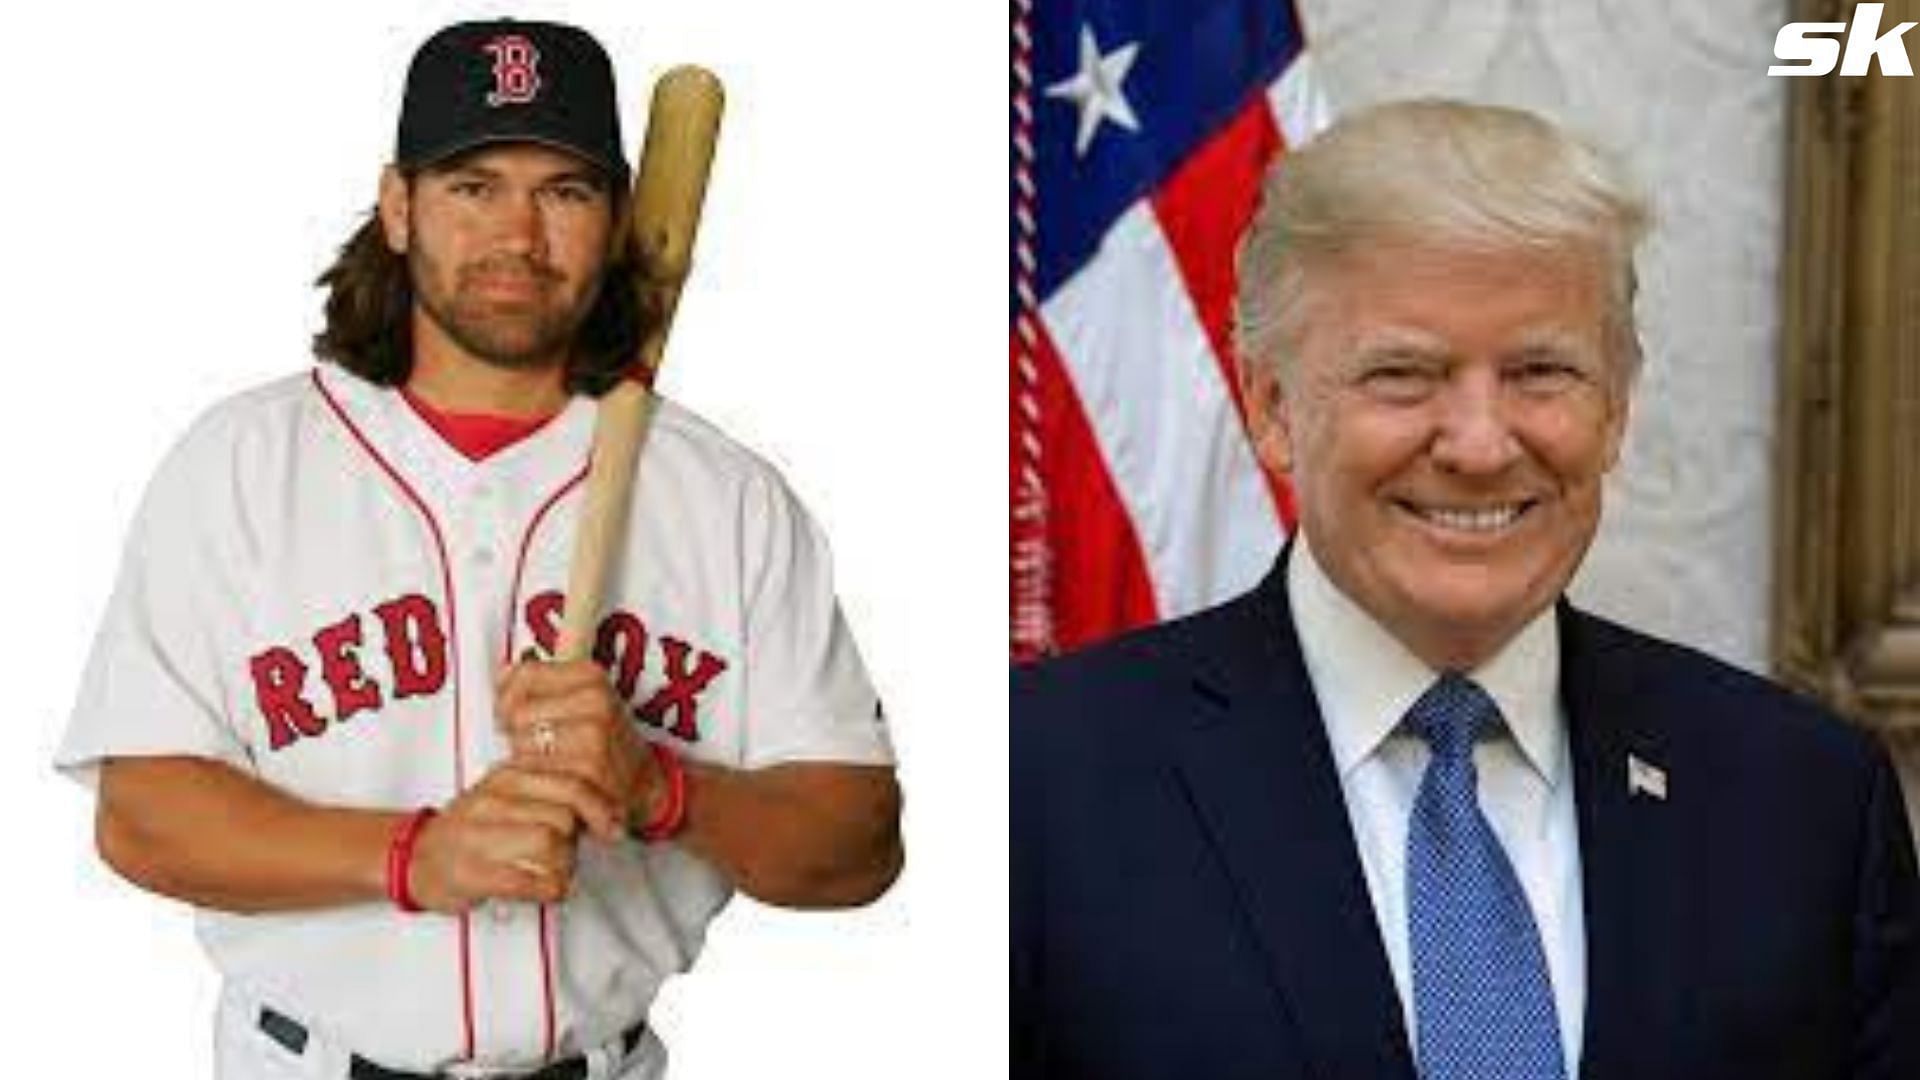 Johnny Damon provokes MLB fans with birthday greetings to Donald Trump:  Just when I thought moving to the Yankees was your career low point